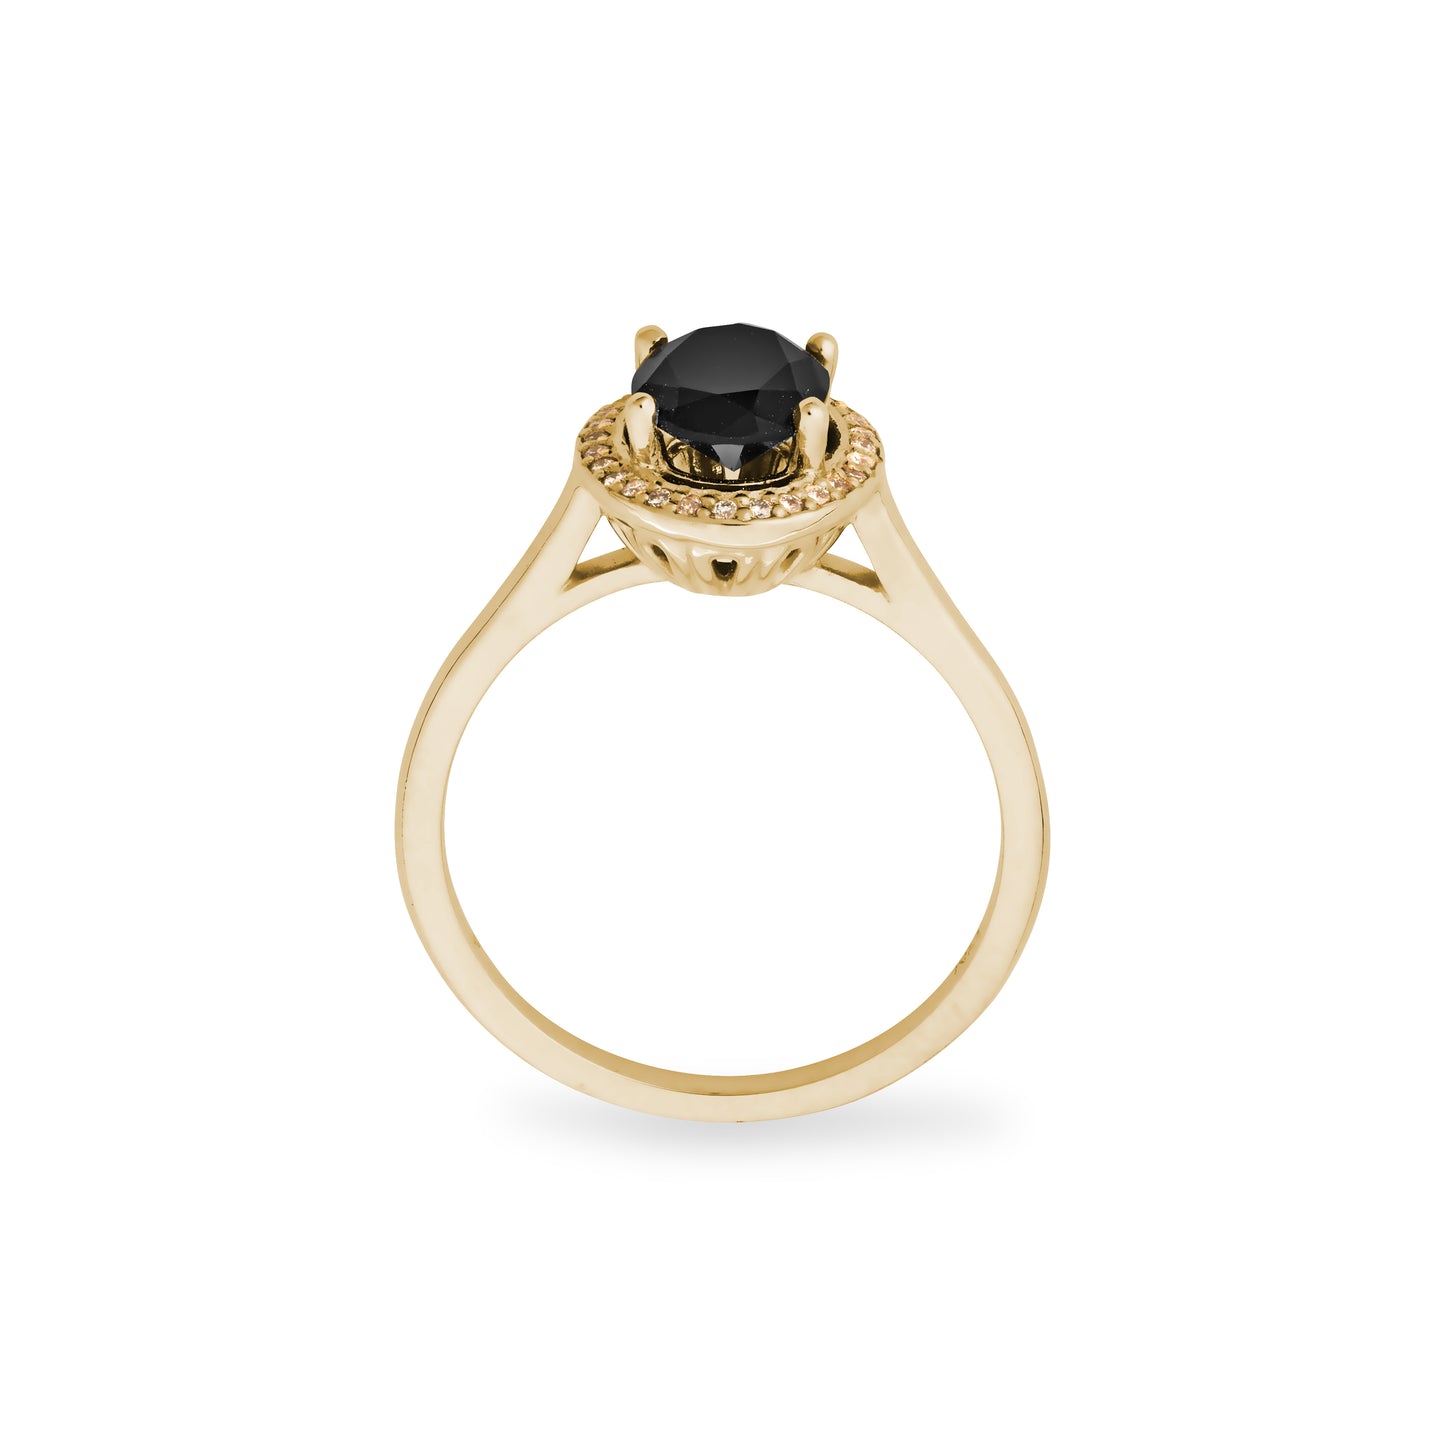 Side view of the Madison Ave Ring with onyx center stone and diamond halo on white background.